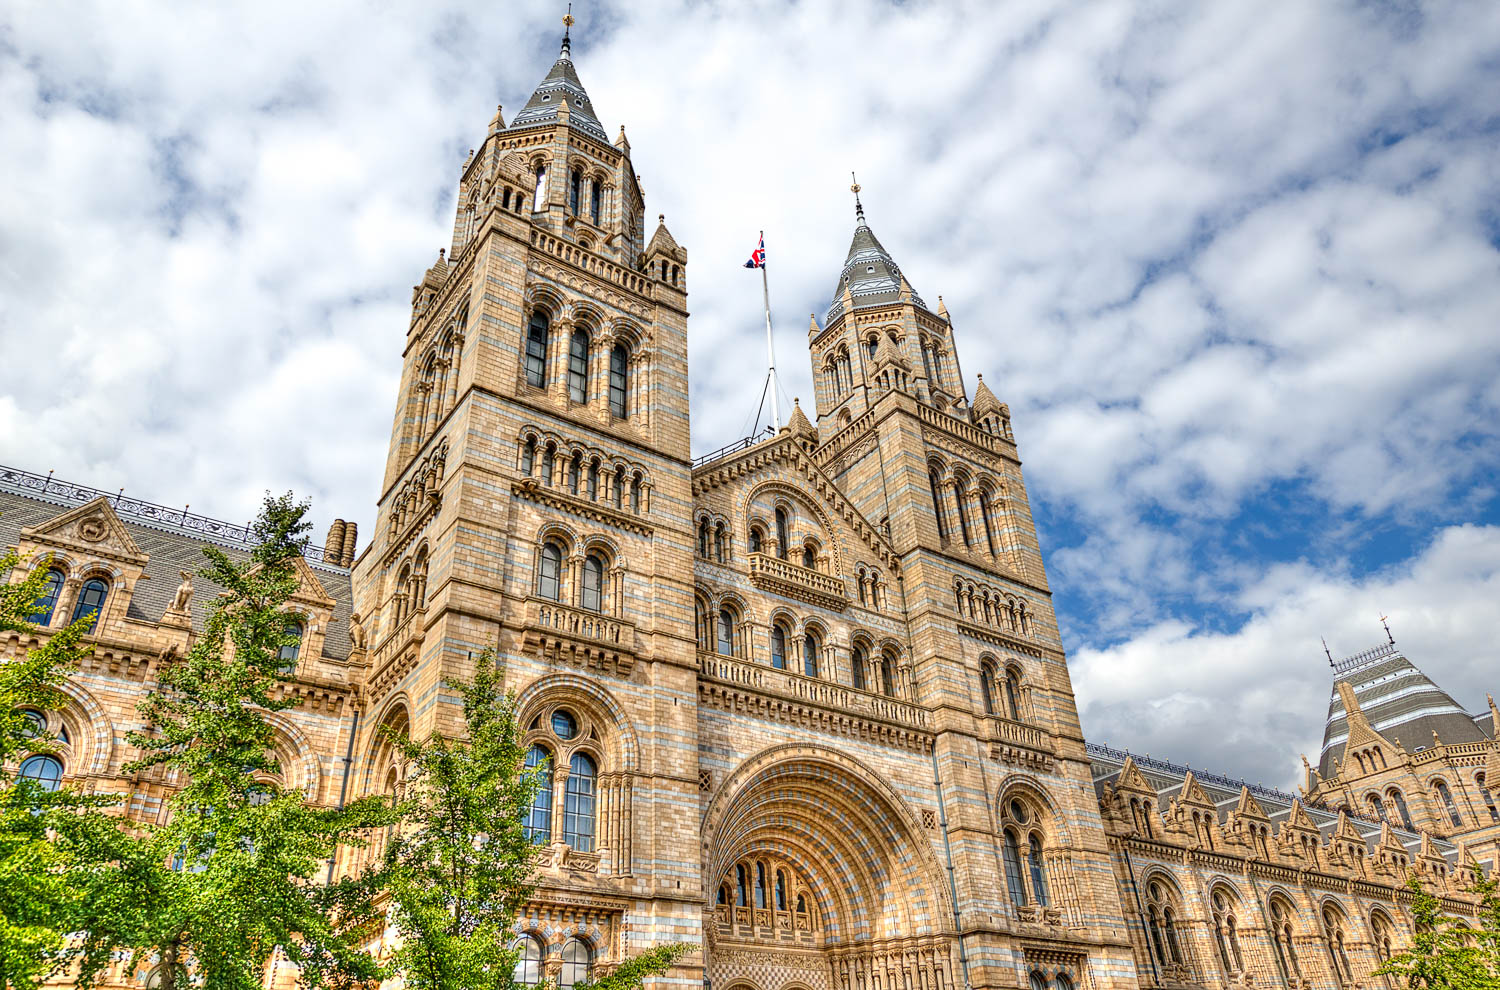 Exterior of the National History Museum in South Kensington - if you're looking for London attractions with air conditioning, this is one to postpone for a cooler day